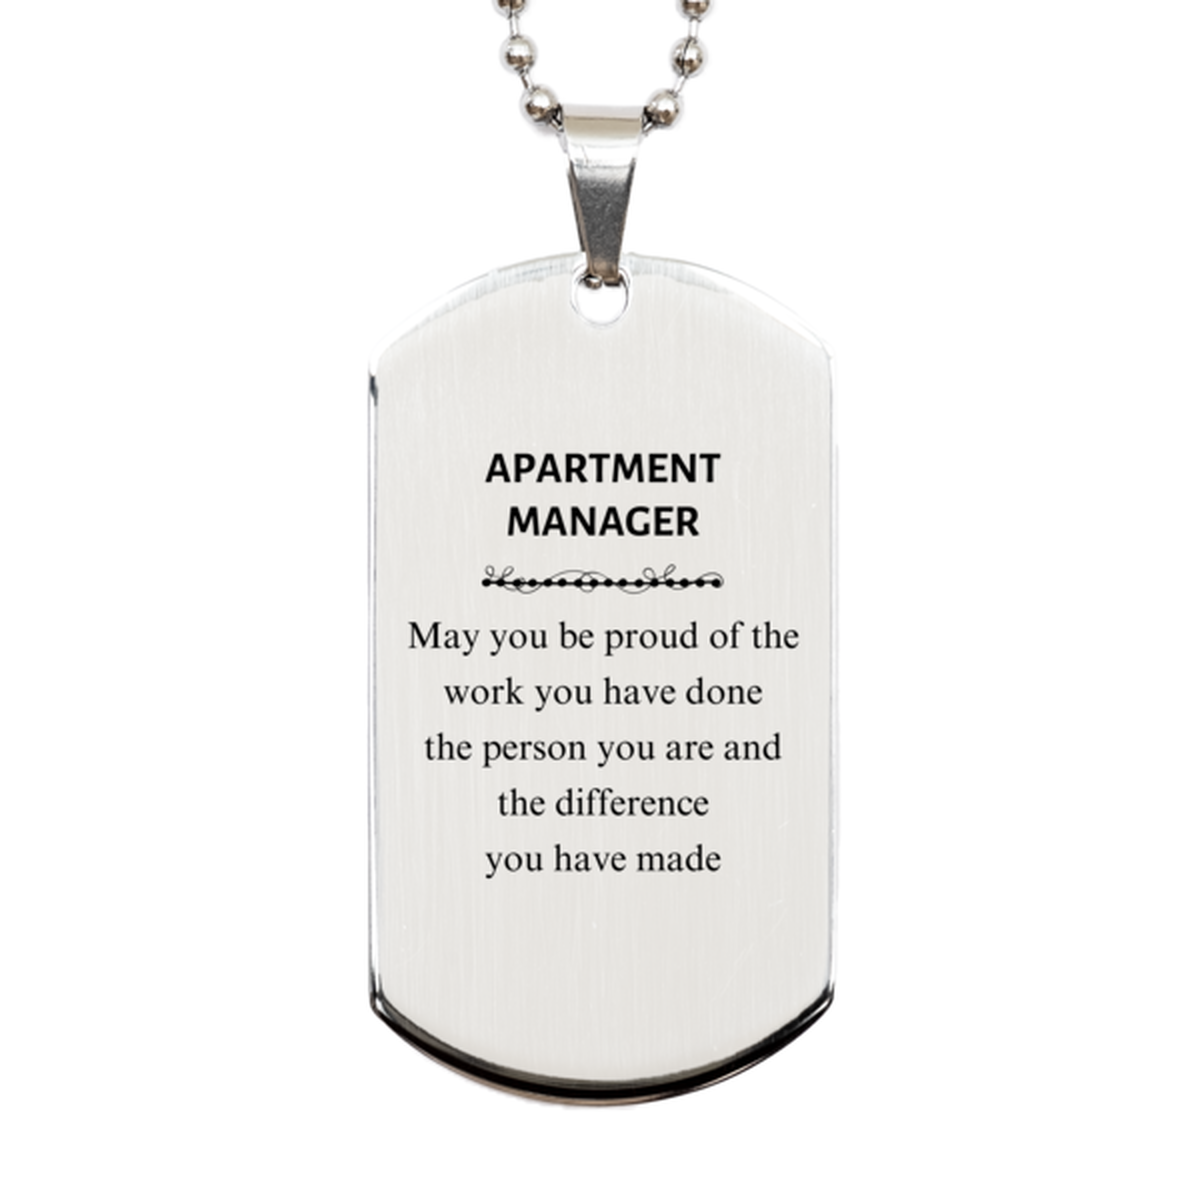 Apartment Manager May you be proud of the work you have done, Retirement Apartment Manager Silver Dog Tag for Colleague Appreciation Gifts Amazing for Apartment Manager